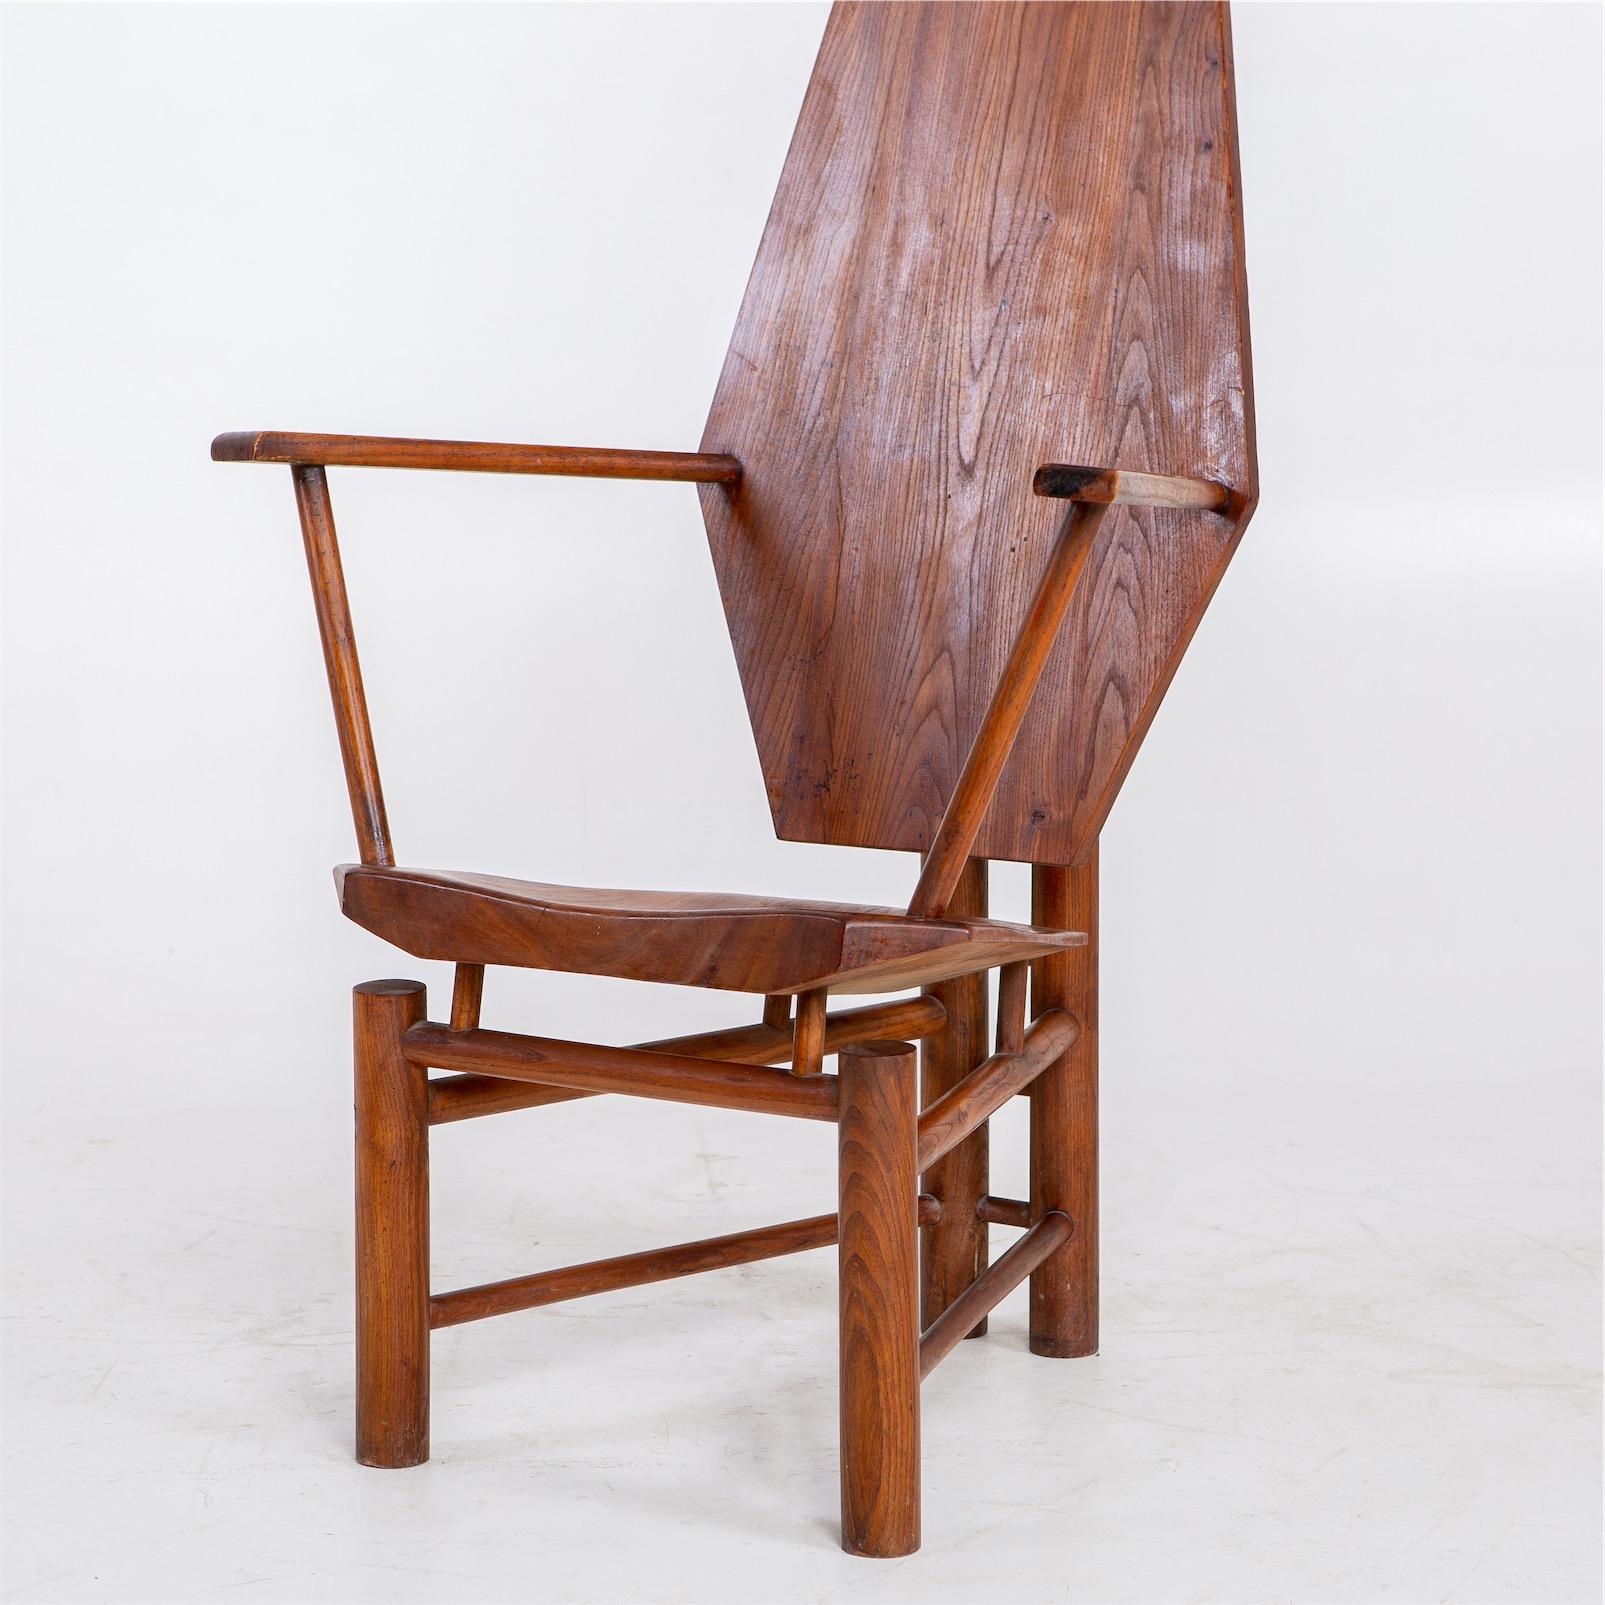 Large wooden armchair of exceptional sculptural design with hexagonal backrest and base constructed of cylindrical wooden struts.